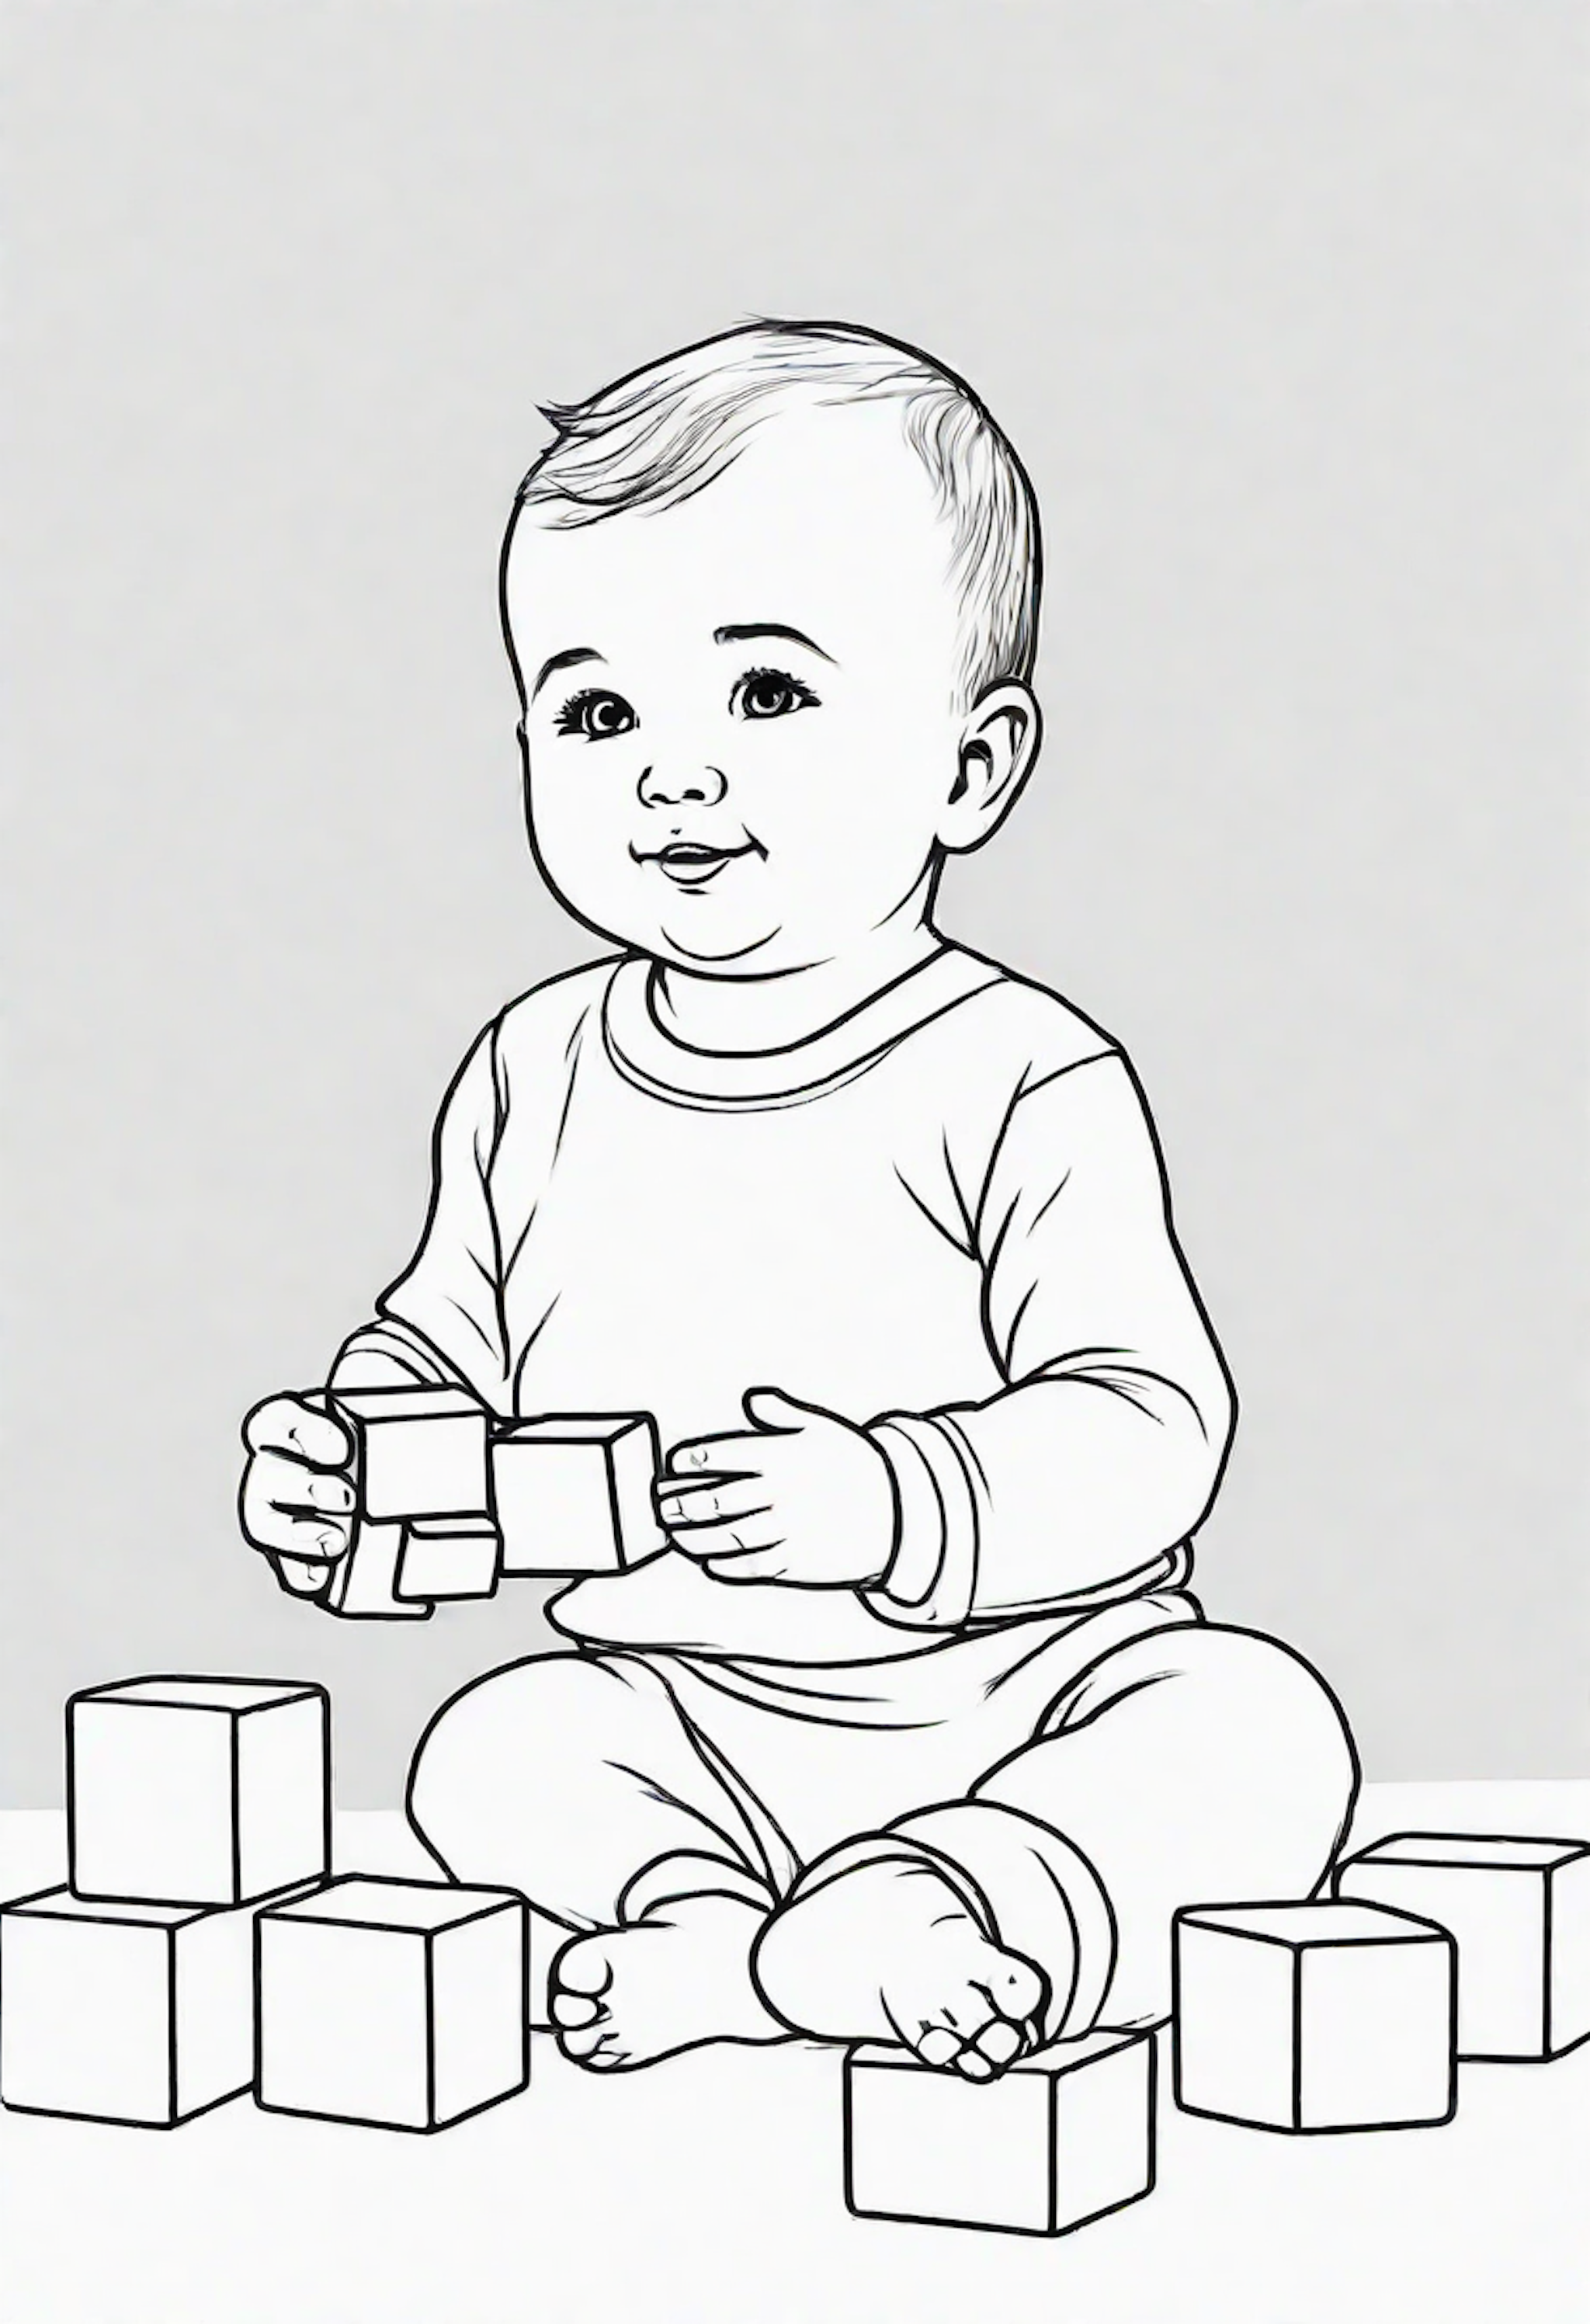 A coloring page for 1 Baby coloring pages